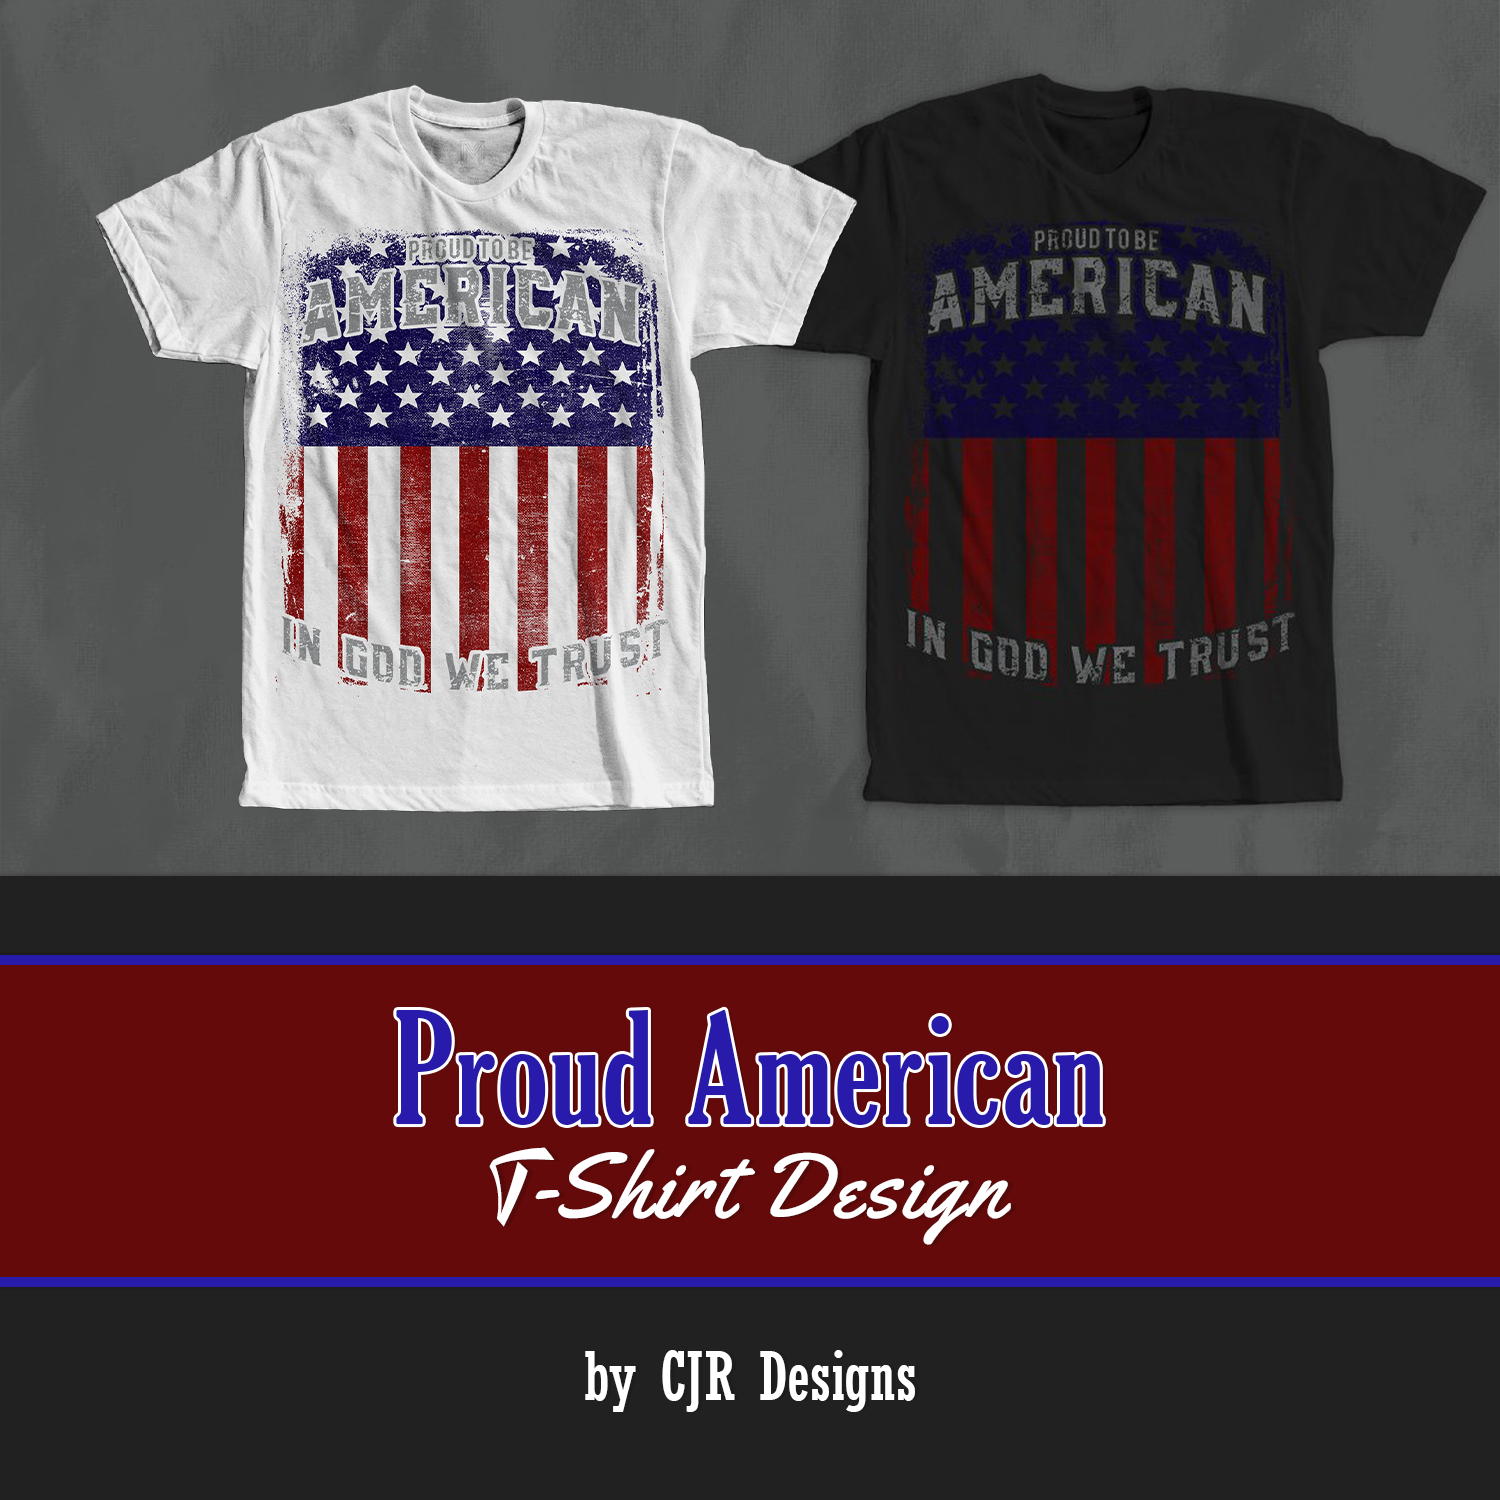 Black and white T-shirt with charming American flag print.